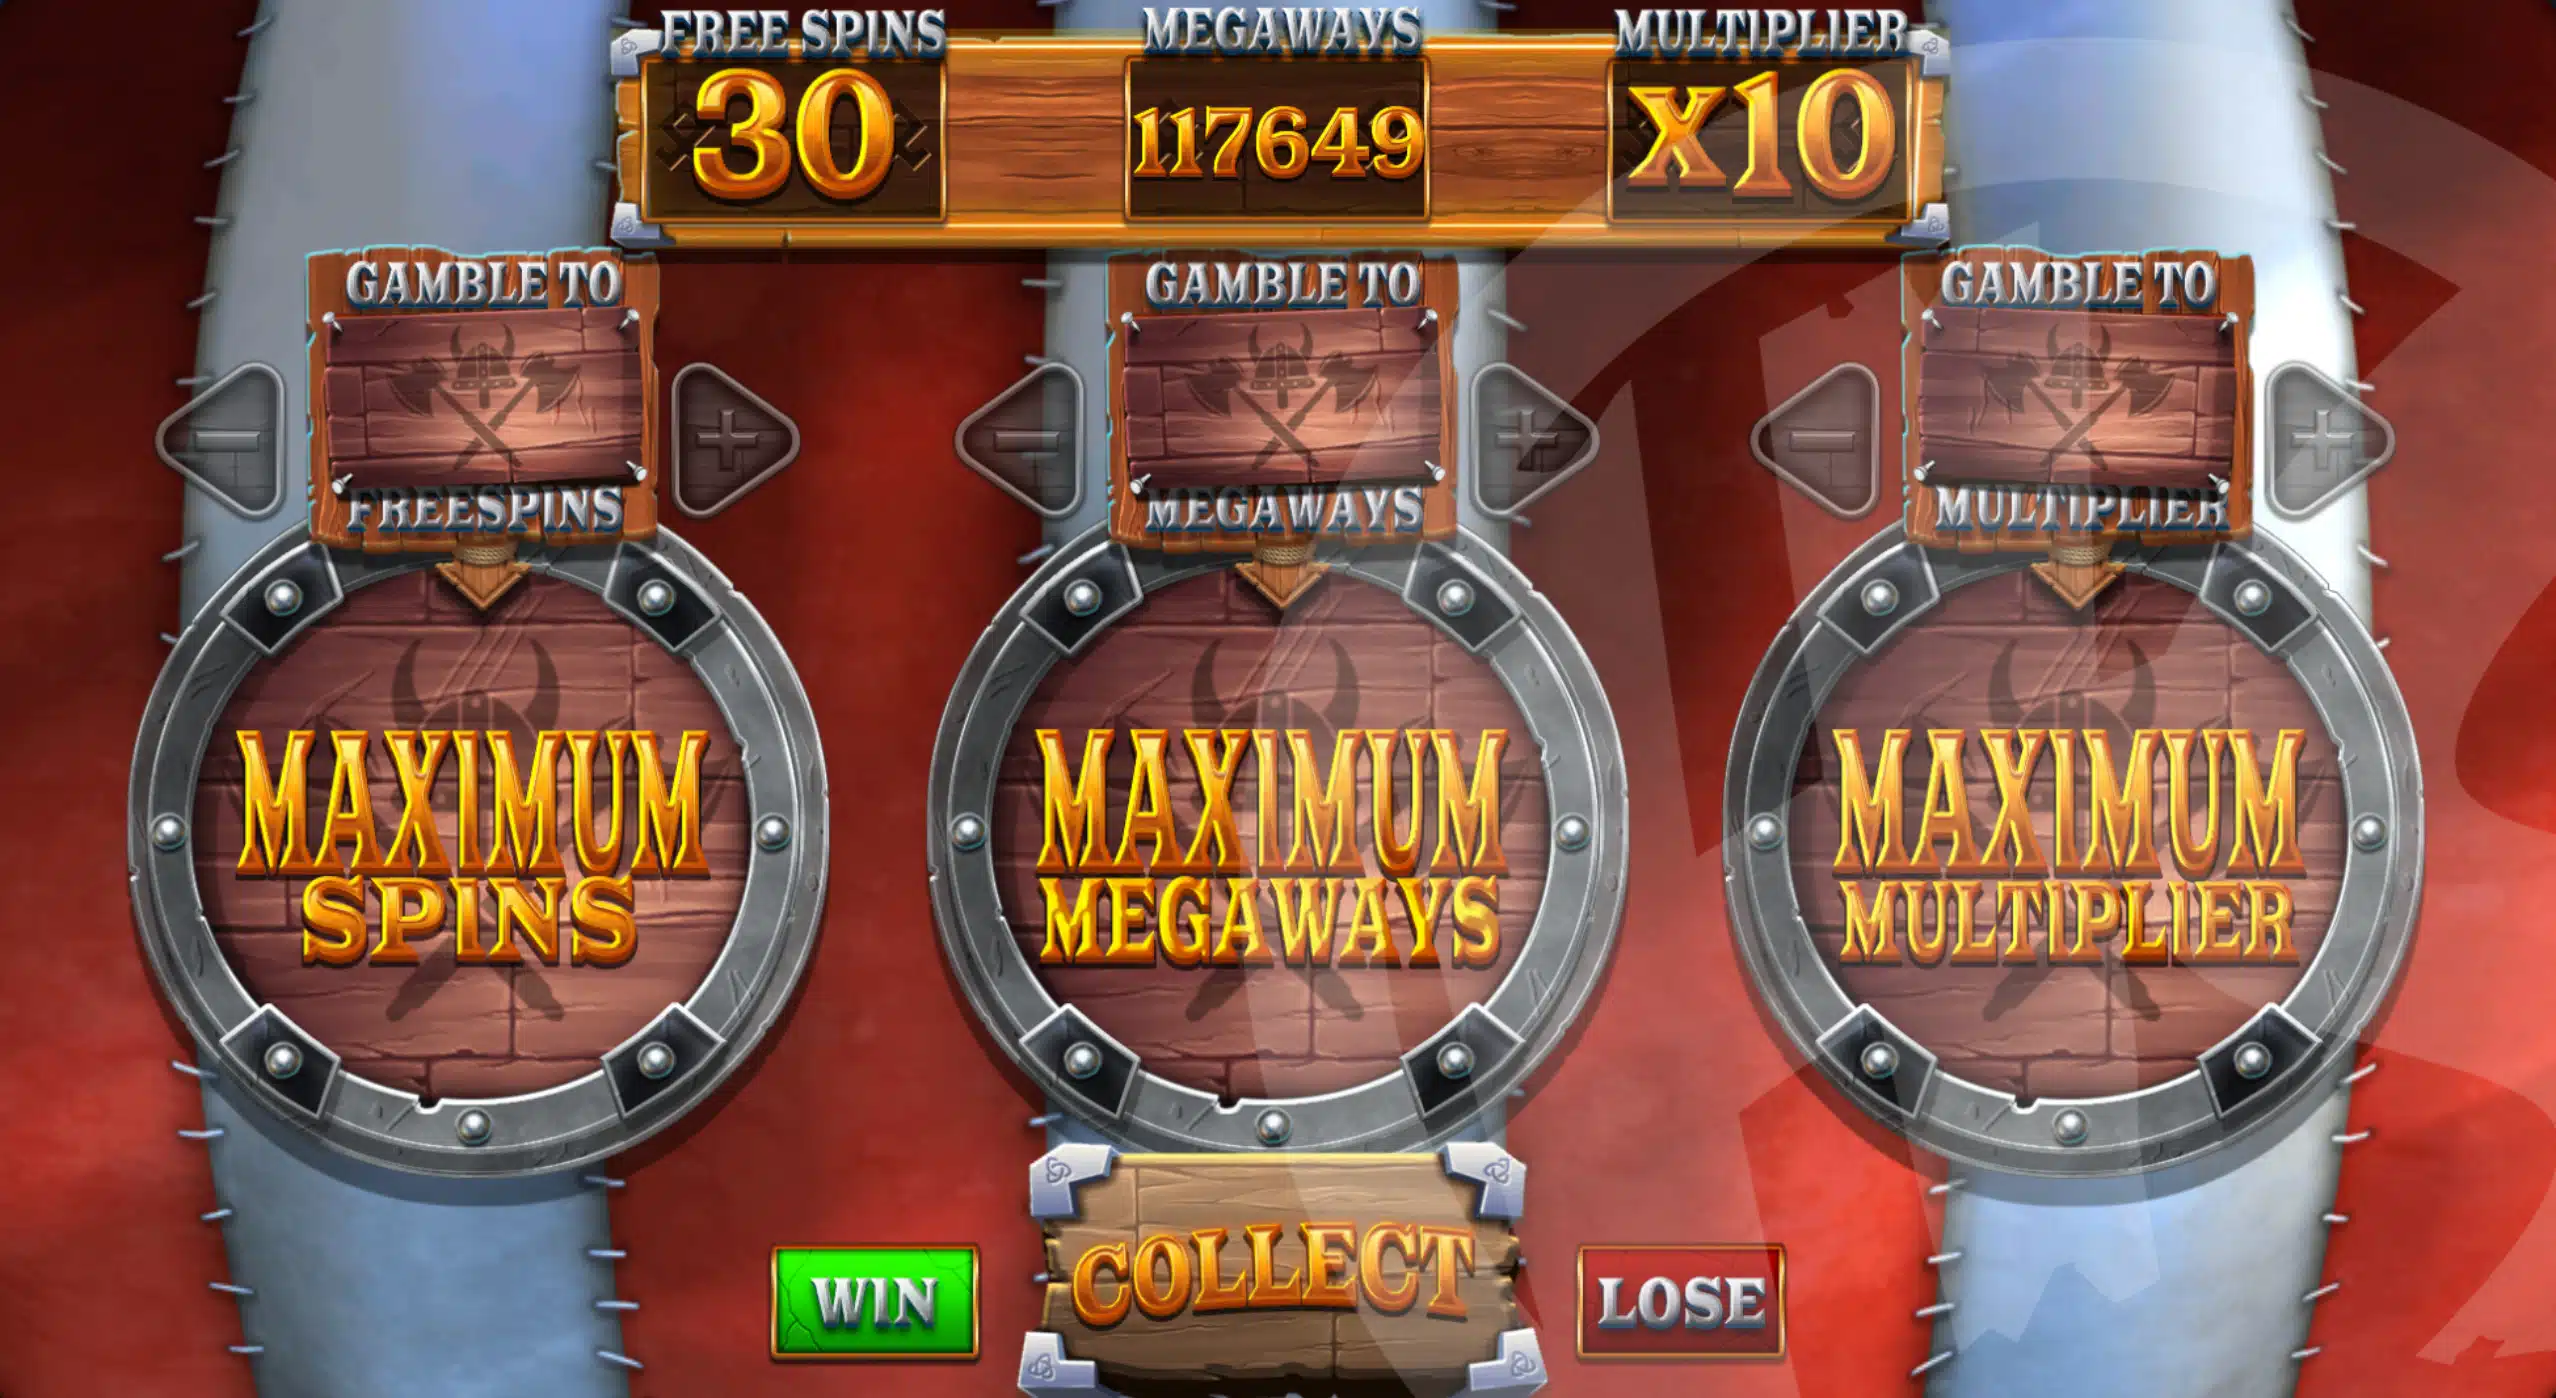 Gamble to Start Free Spins With up to 30 Spins, a x10 Starting Multiplier, and a Minimum of 117,649 Ways Guaranteed on Every Spin